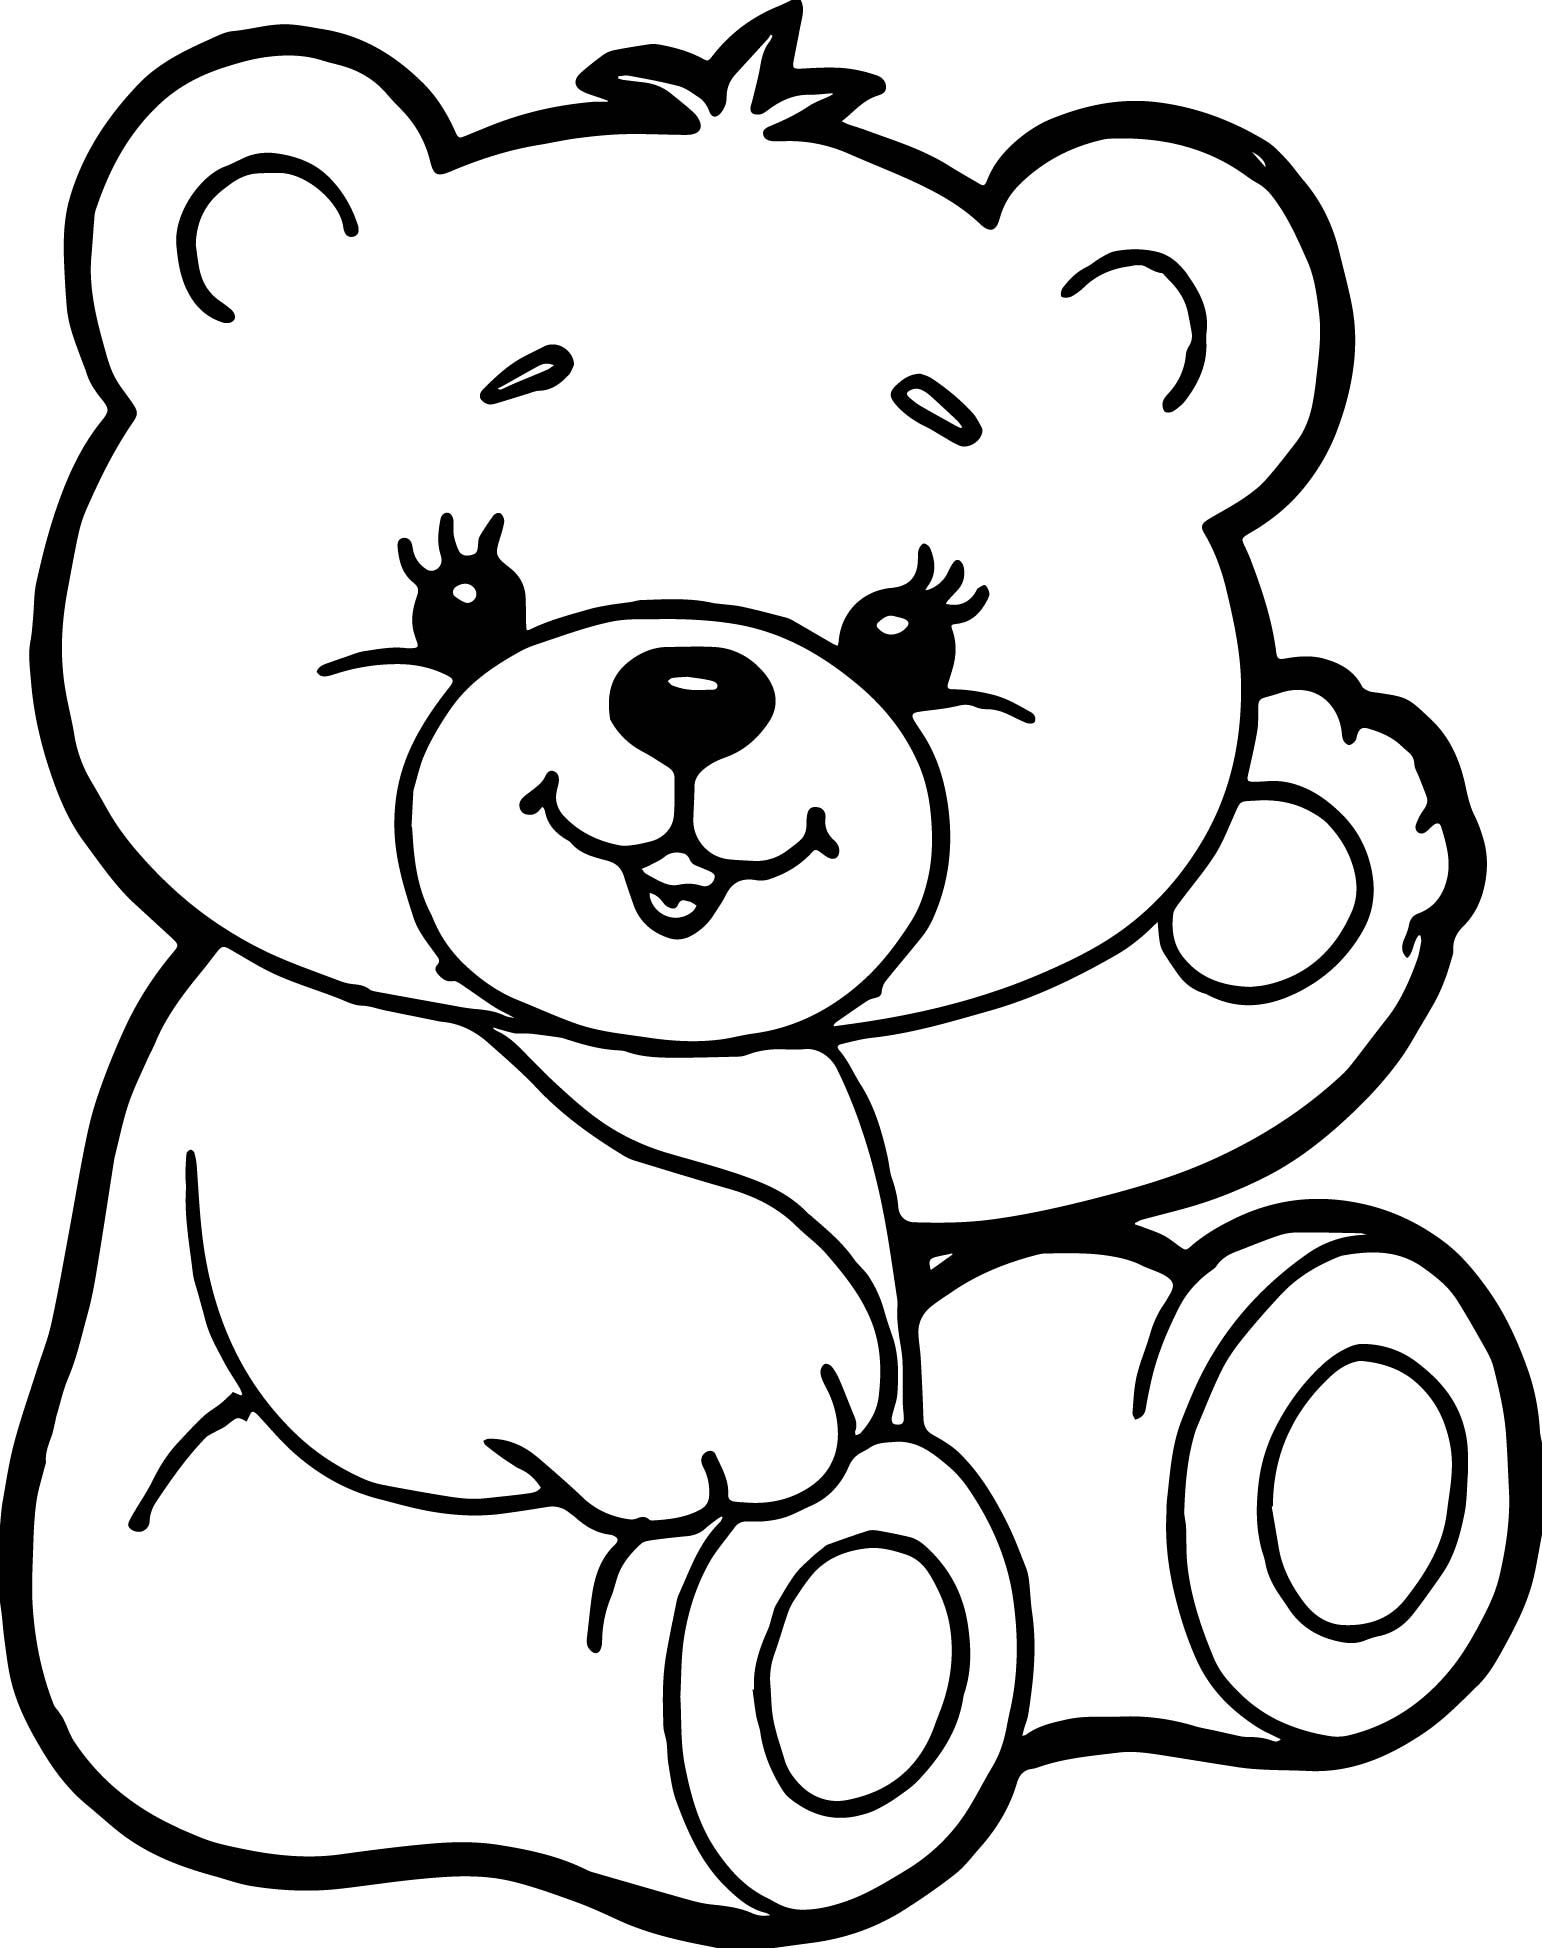 Free Printable Coloring Pages Of Teddy Bears